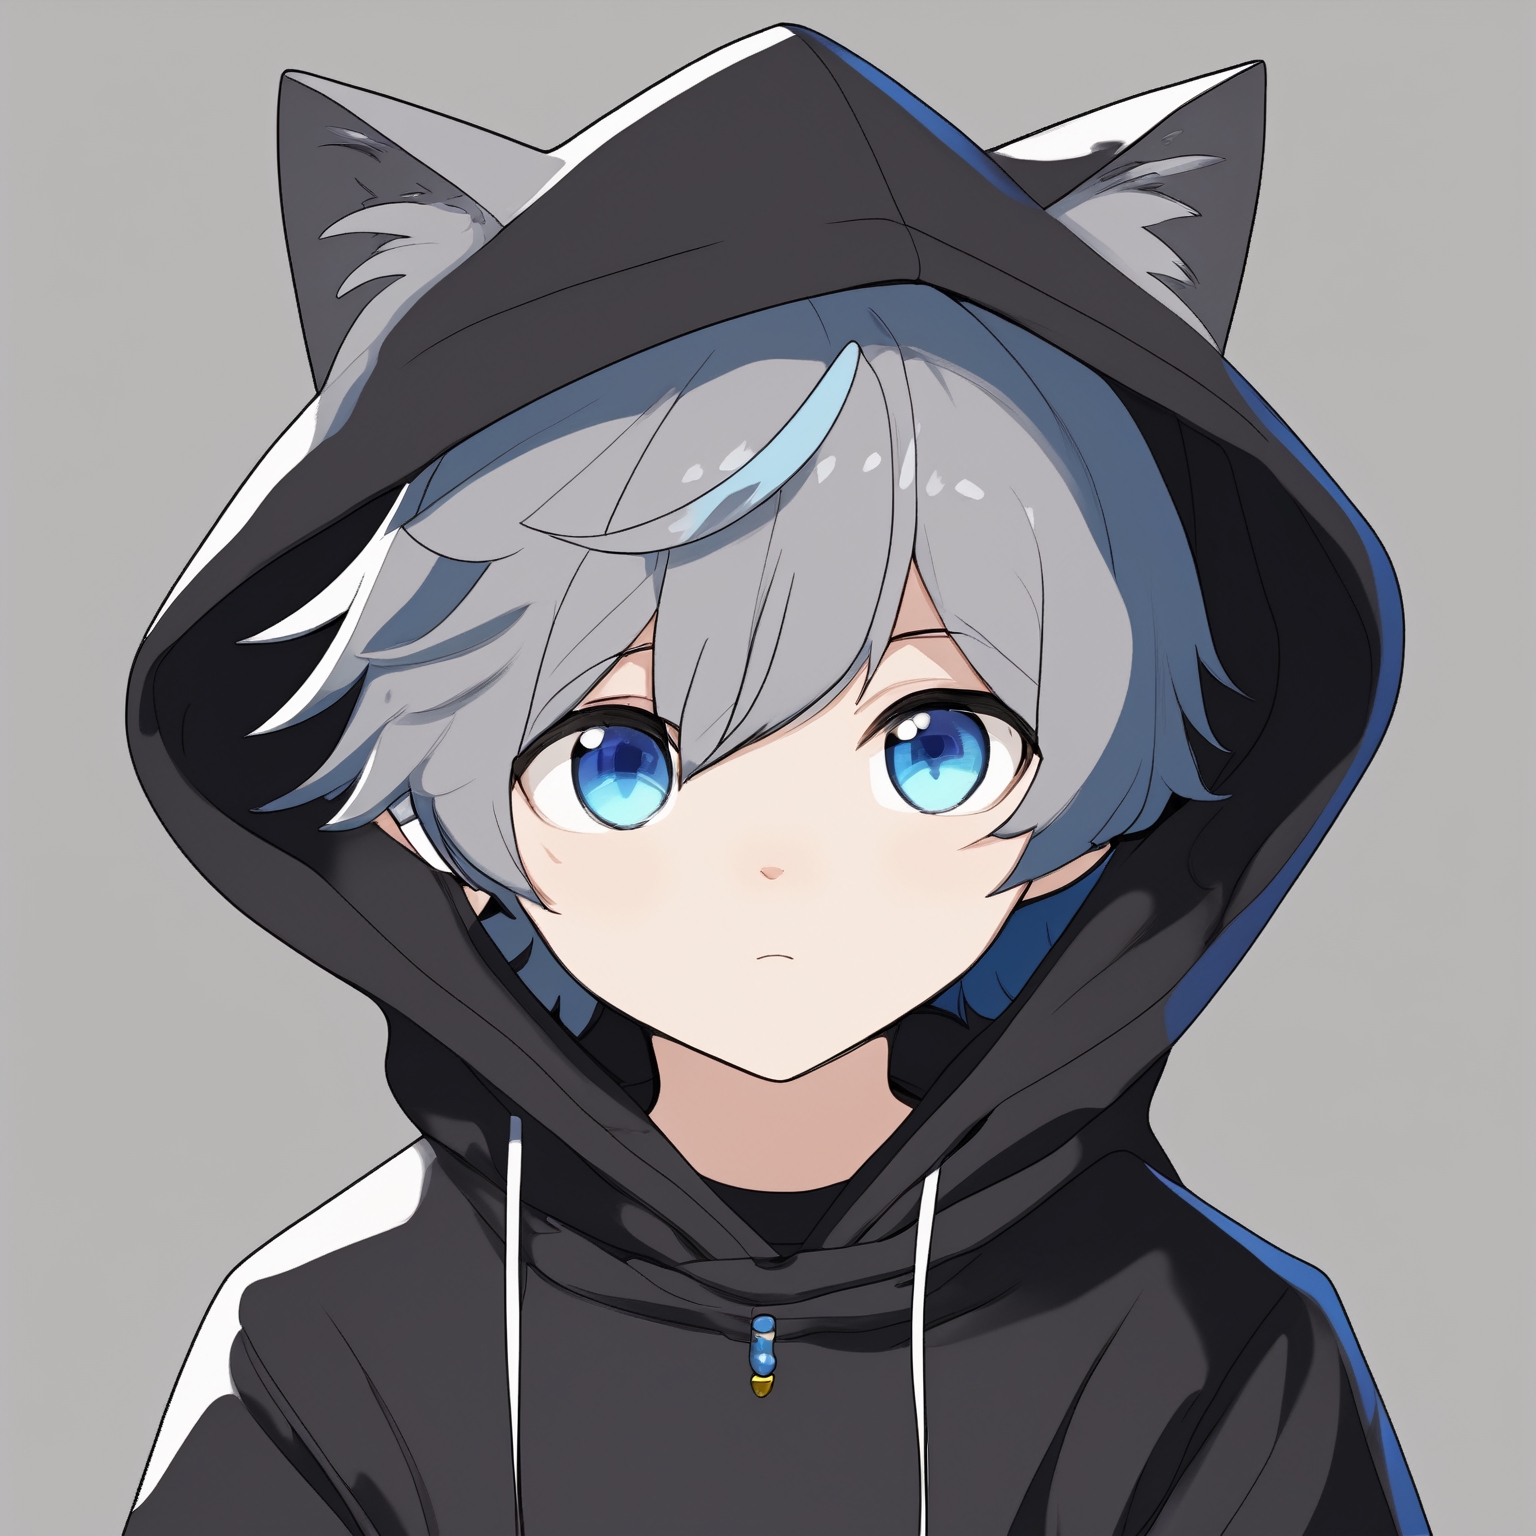 anime guy with gray hair and blue eyes